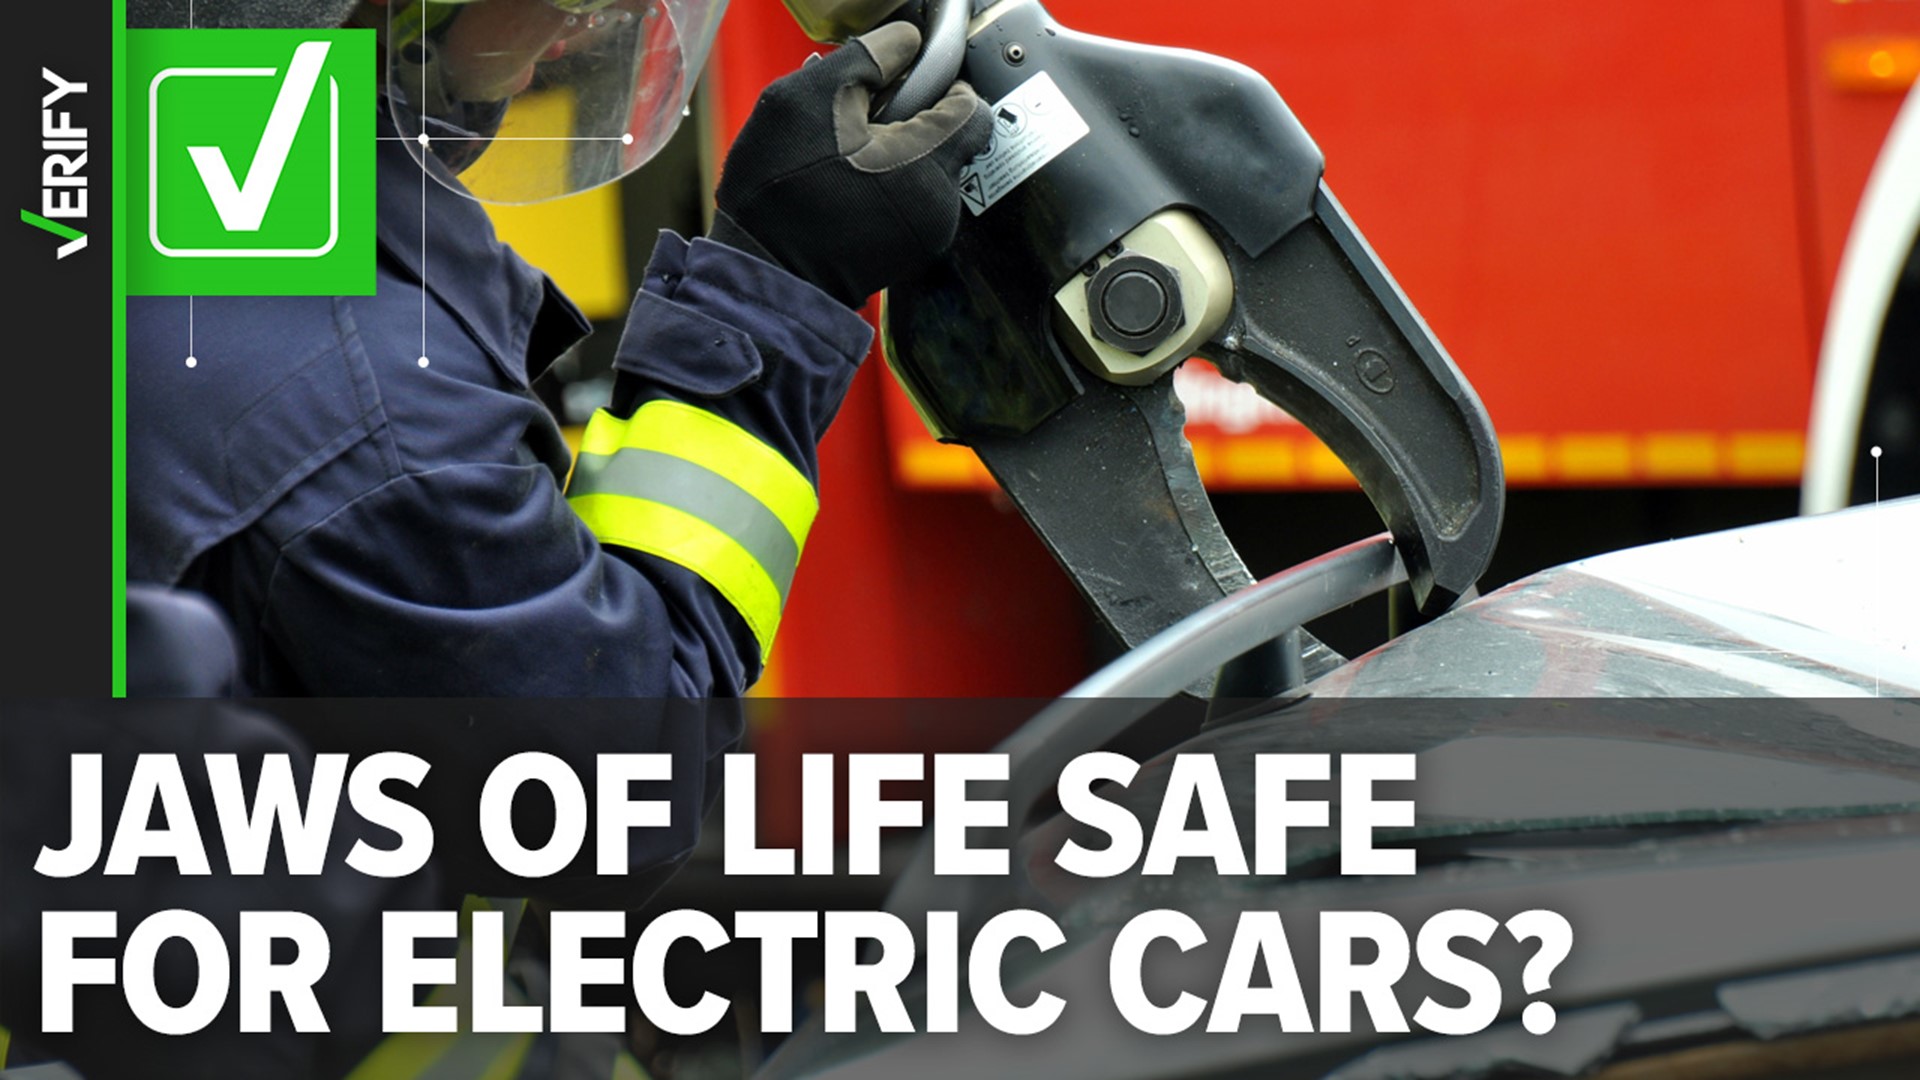 Contrary to claims in multiple social media posts, emergency responders use tools like the Jaws of Life on EVs to safely rescue accident victims after a crash.